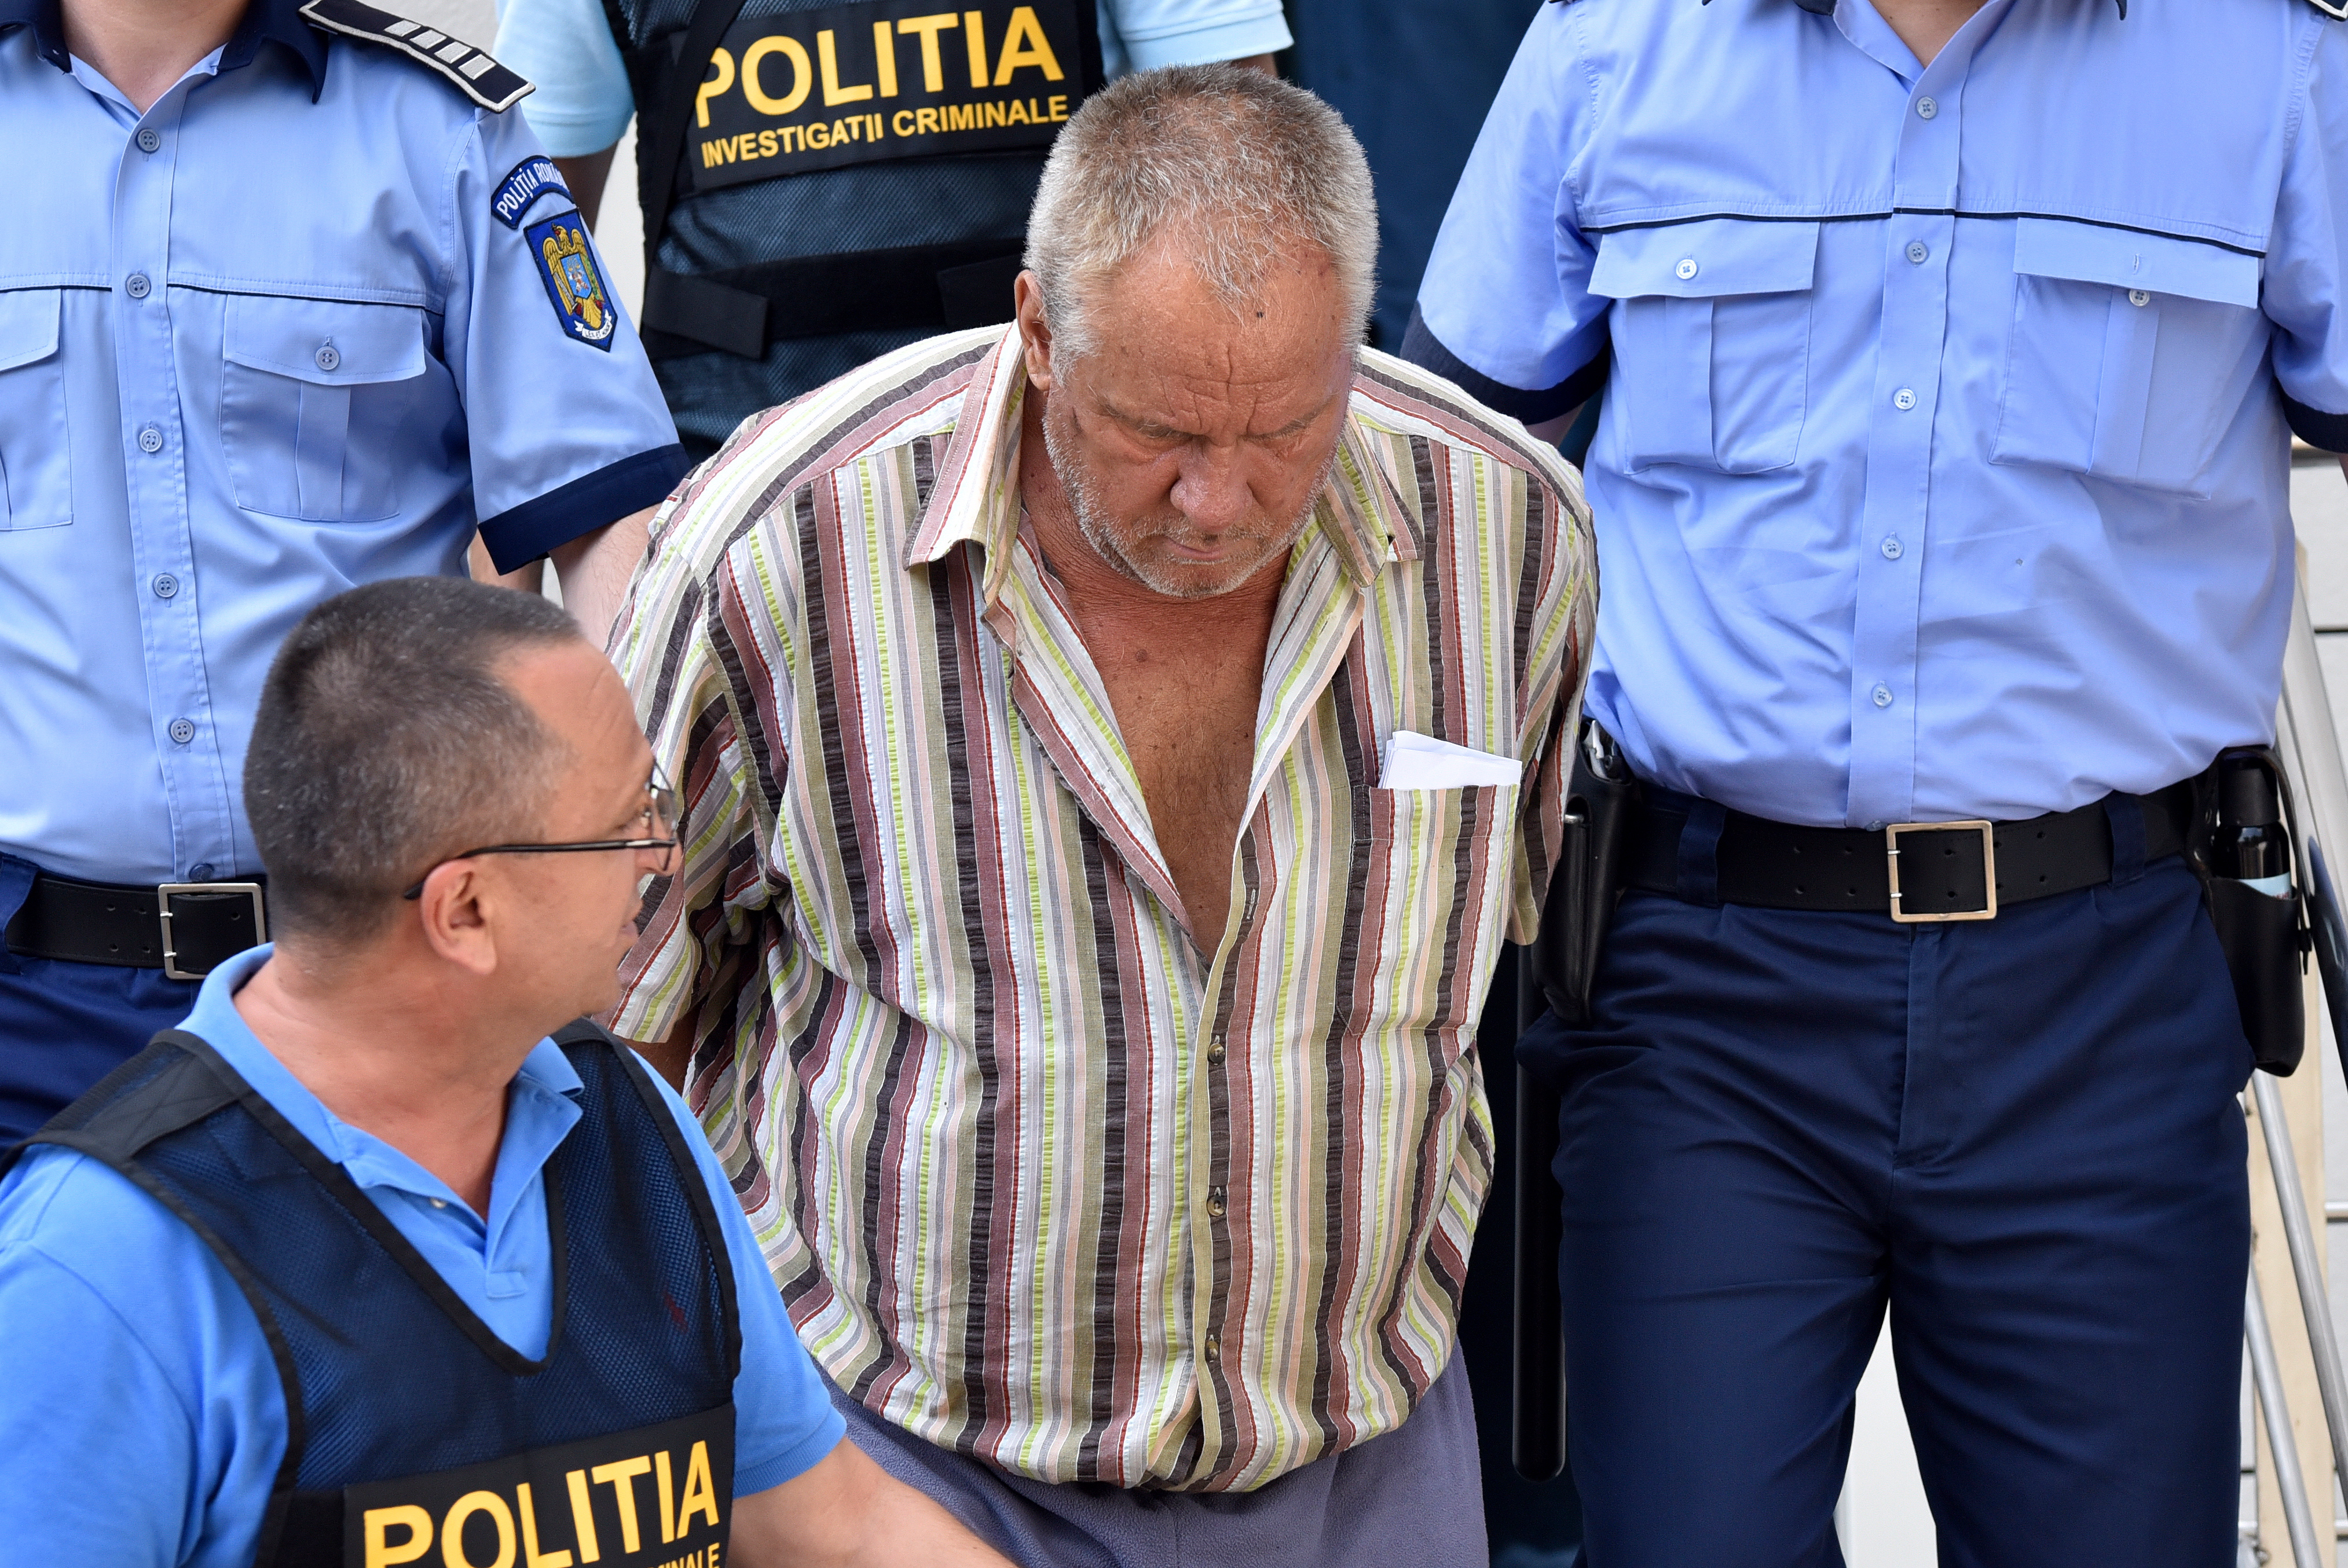 epa07754729 (FILE) - Romanian police officers escort the alleged suspect (C) at Dolj county court, Romania, 27 July 2018, reissued 03 August 2019, after the man was accused of kidnapping a 15 year old girl, who is now confirmed by forensics to have been killed, in the southern city of Caracal, Romania. Alexandra a 15-year-old girl, disappeared on 25 July 2019 hitchhiking to Caracal. Media reports on 28 July 2019 that despite making three emergency calls telling police where she was being held and she had been abducted by a car driver Alexandra's calls went unheeded. Romanian police did not search the property until 19 hours after the girl's last call finding human remains and jewellery. Today, the DIICOT (Directorate for the Investigation of Organized Crime and Terrorism)prosecutors make public the fact that forensic biological evidence taken from the suspect's home matched Alexandra's DNA, announcing her relatives last night.  EPA/BOGDAN DANSECU ROMANIA OUT